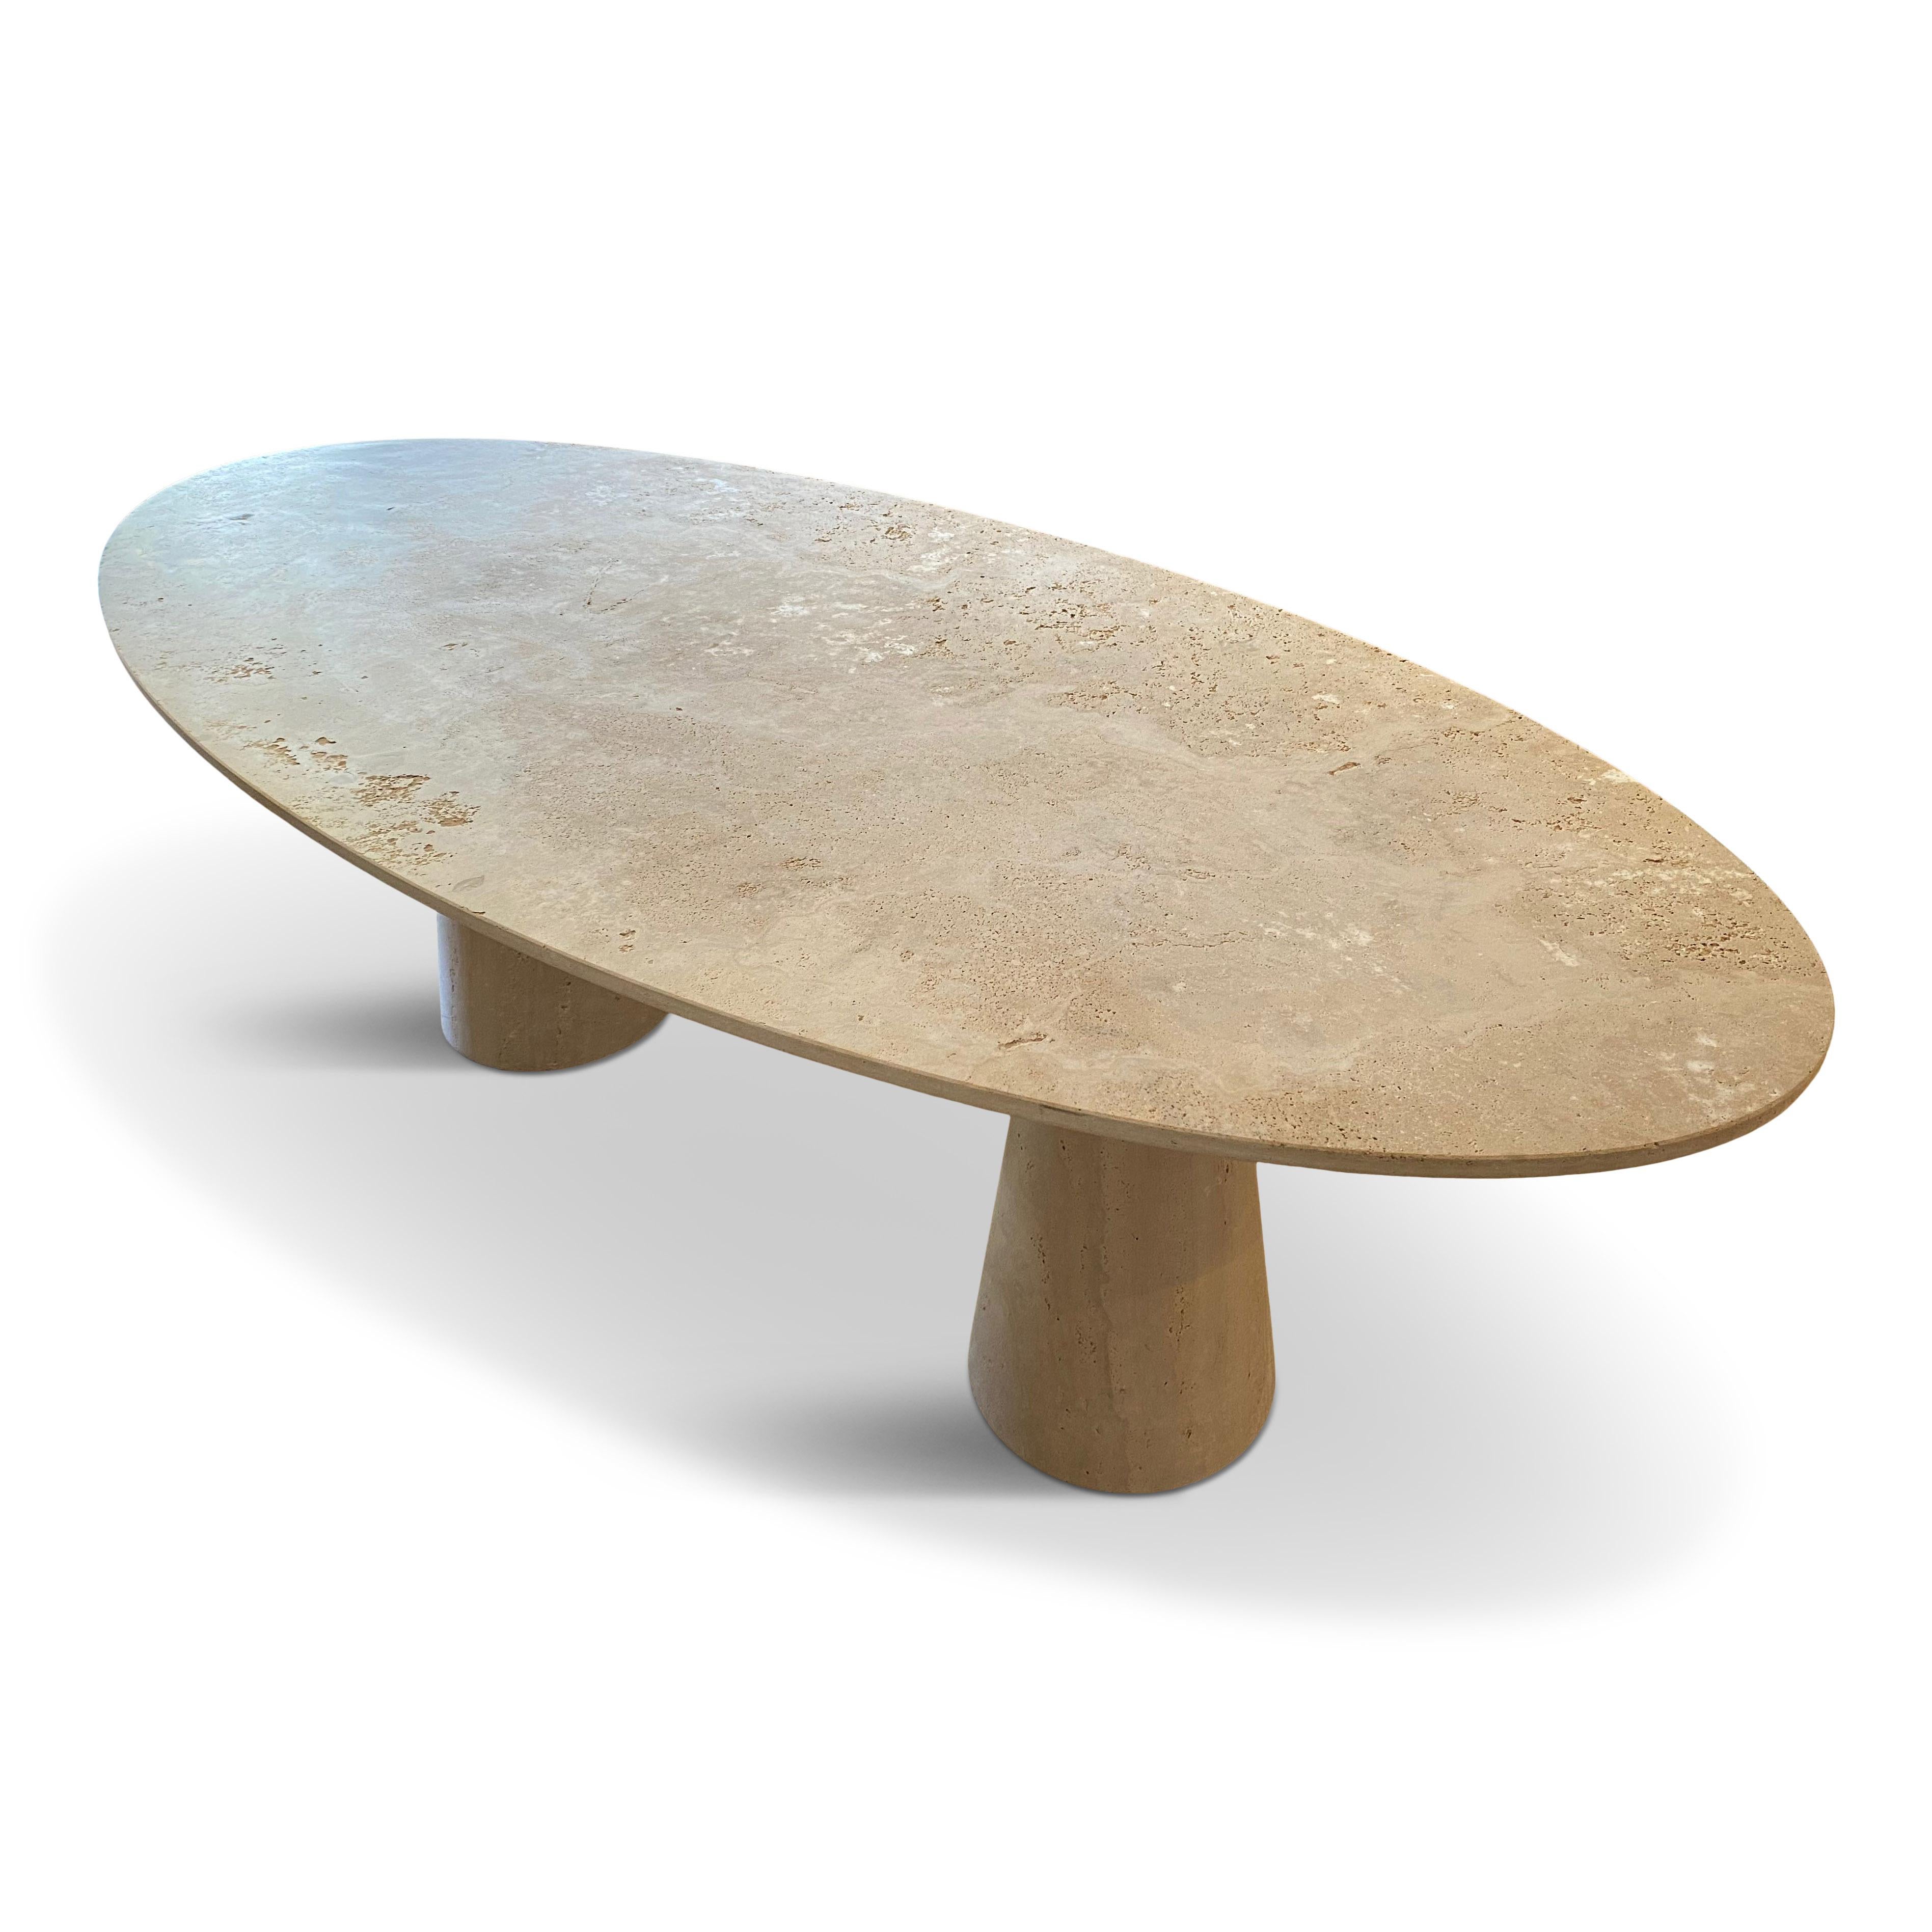 Bespoke Italian Travertine Oval Dining Table For Sale 8